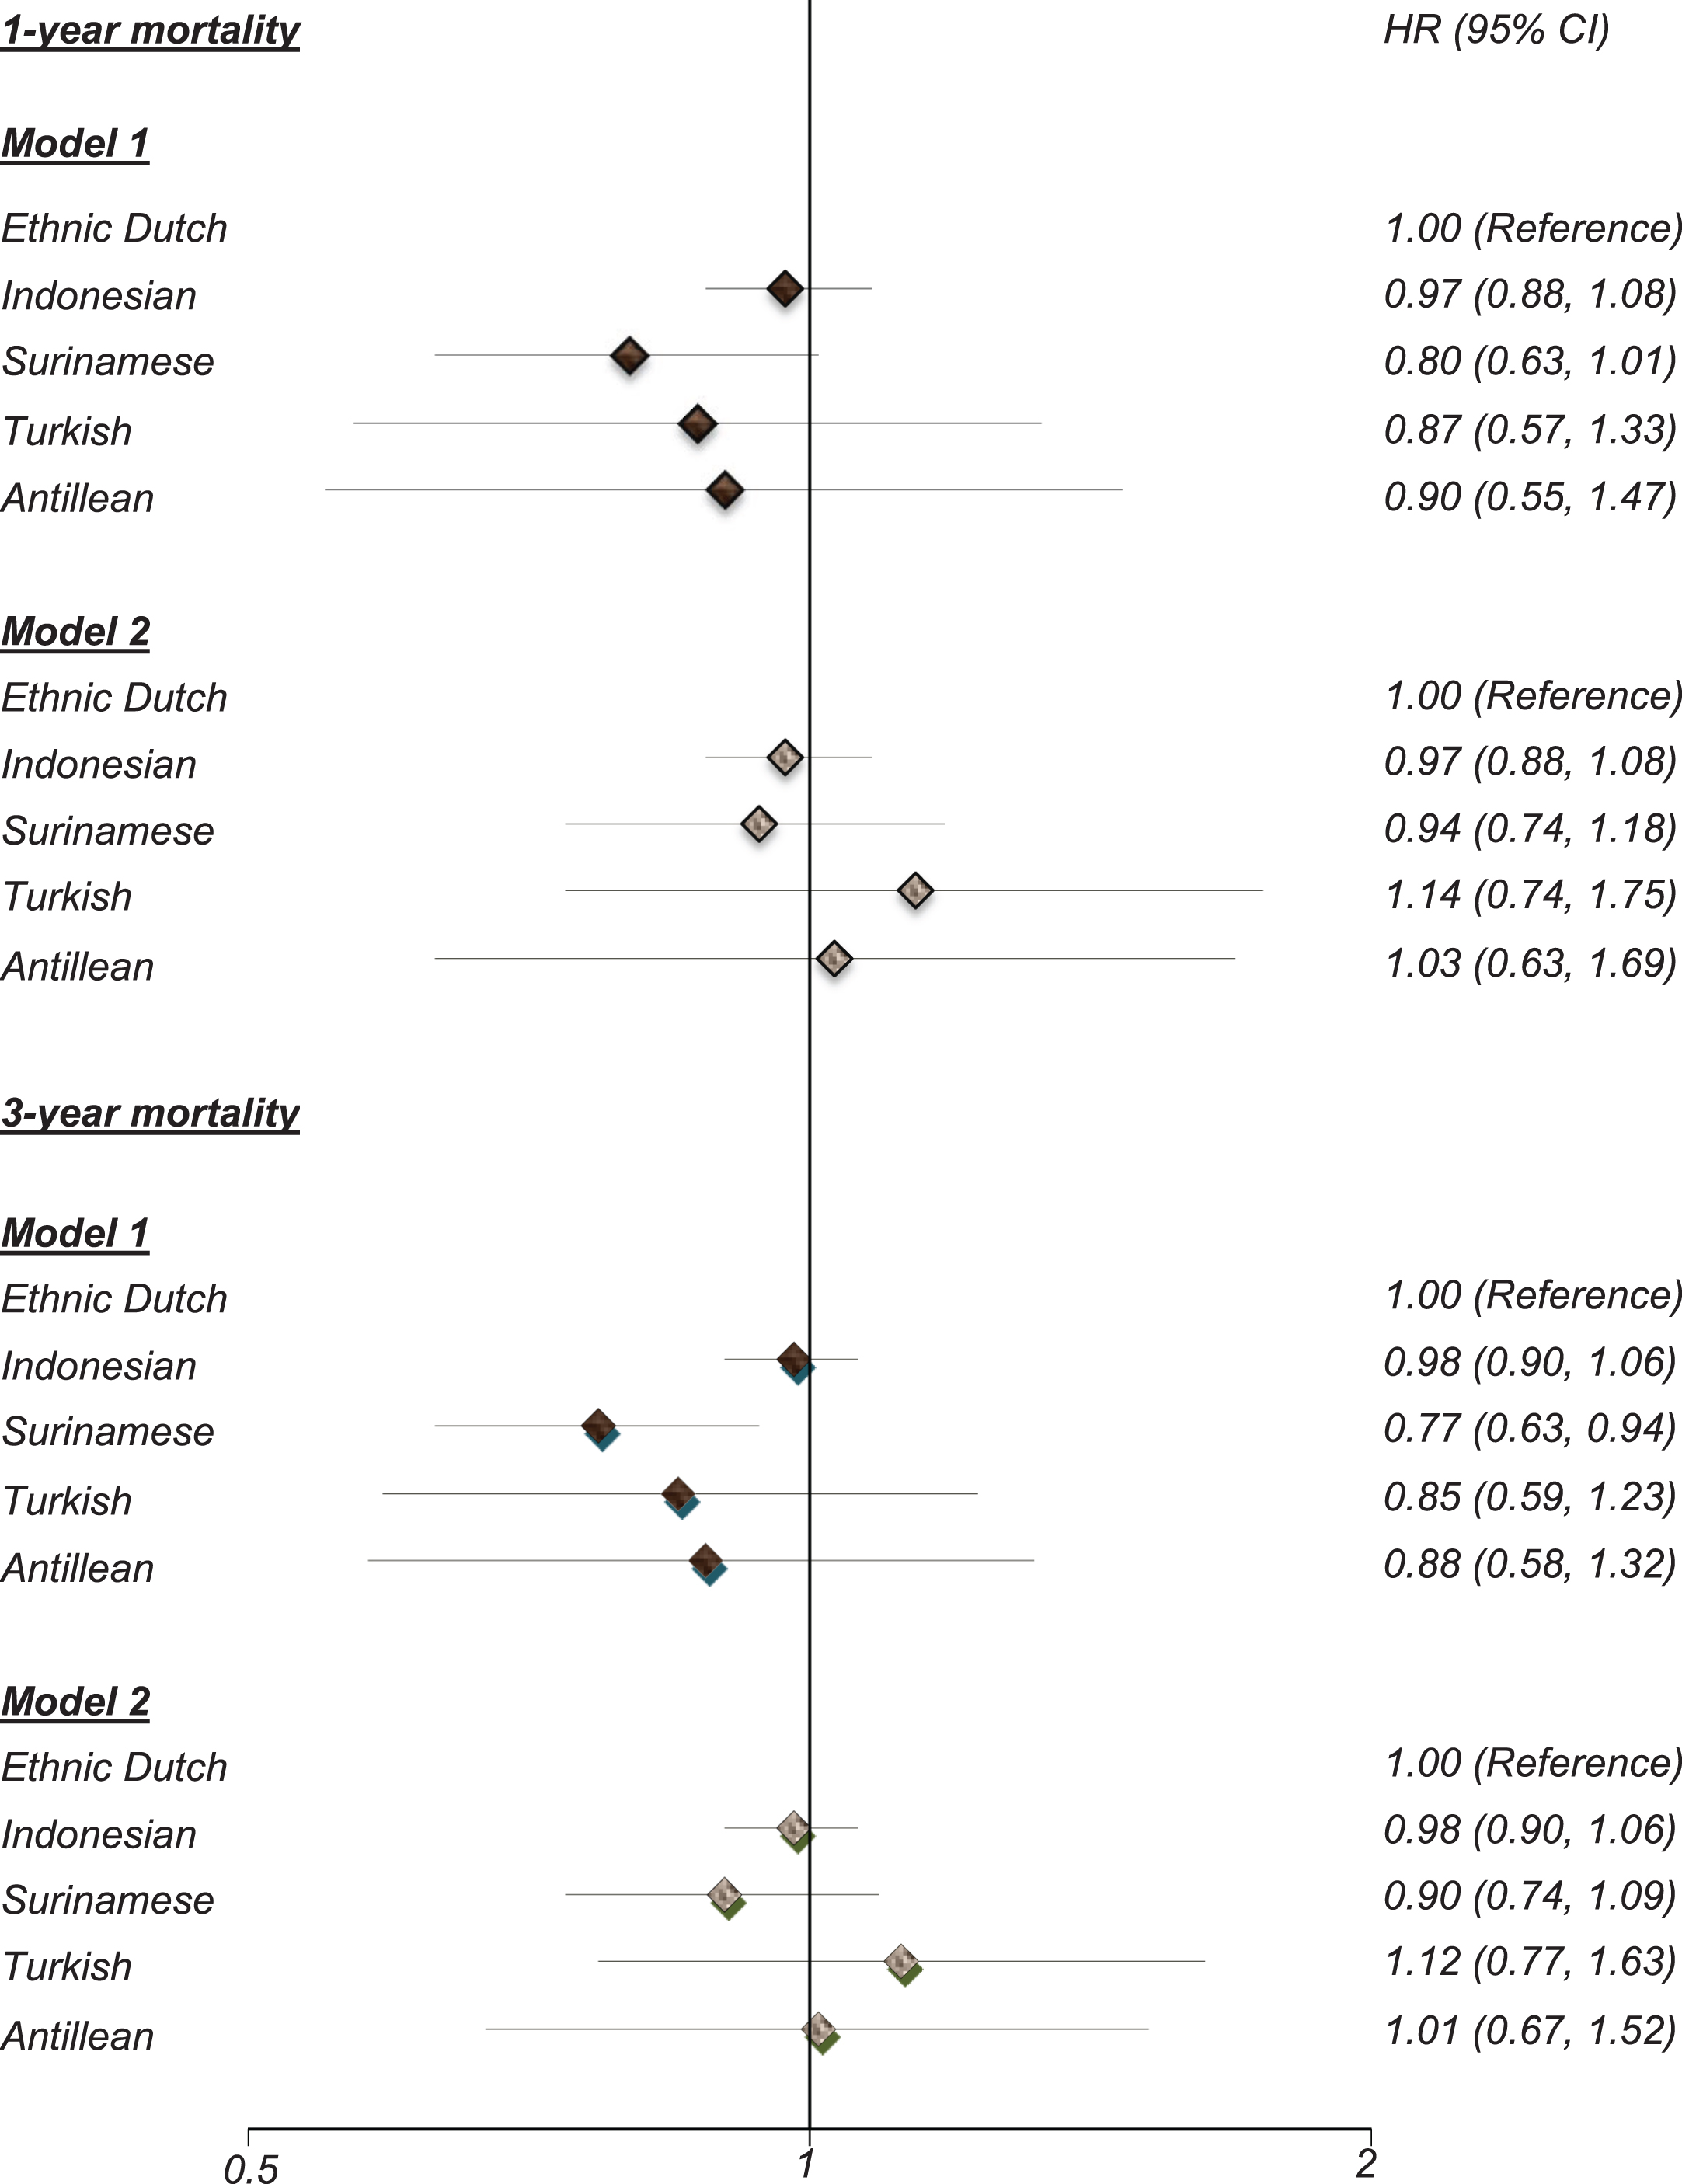 Ethnic Variations in Prognosis of Patients with Dementia A Prospective Nationwide Registry Linkage Study in The Netherlands